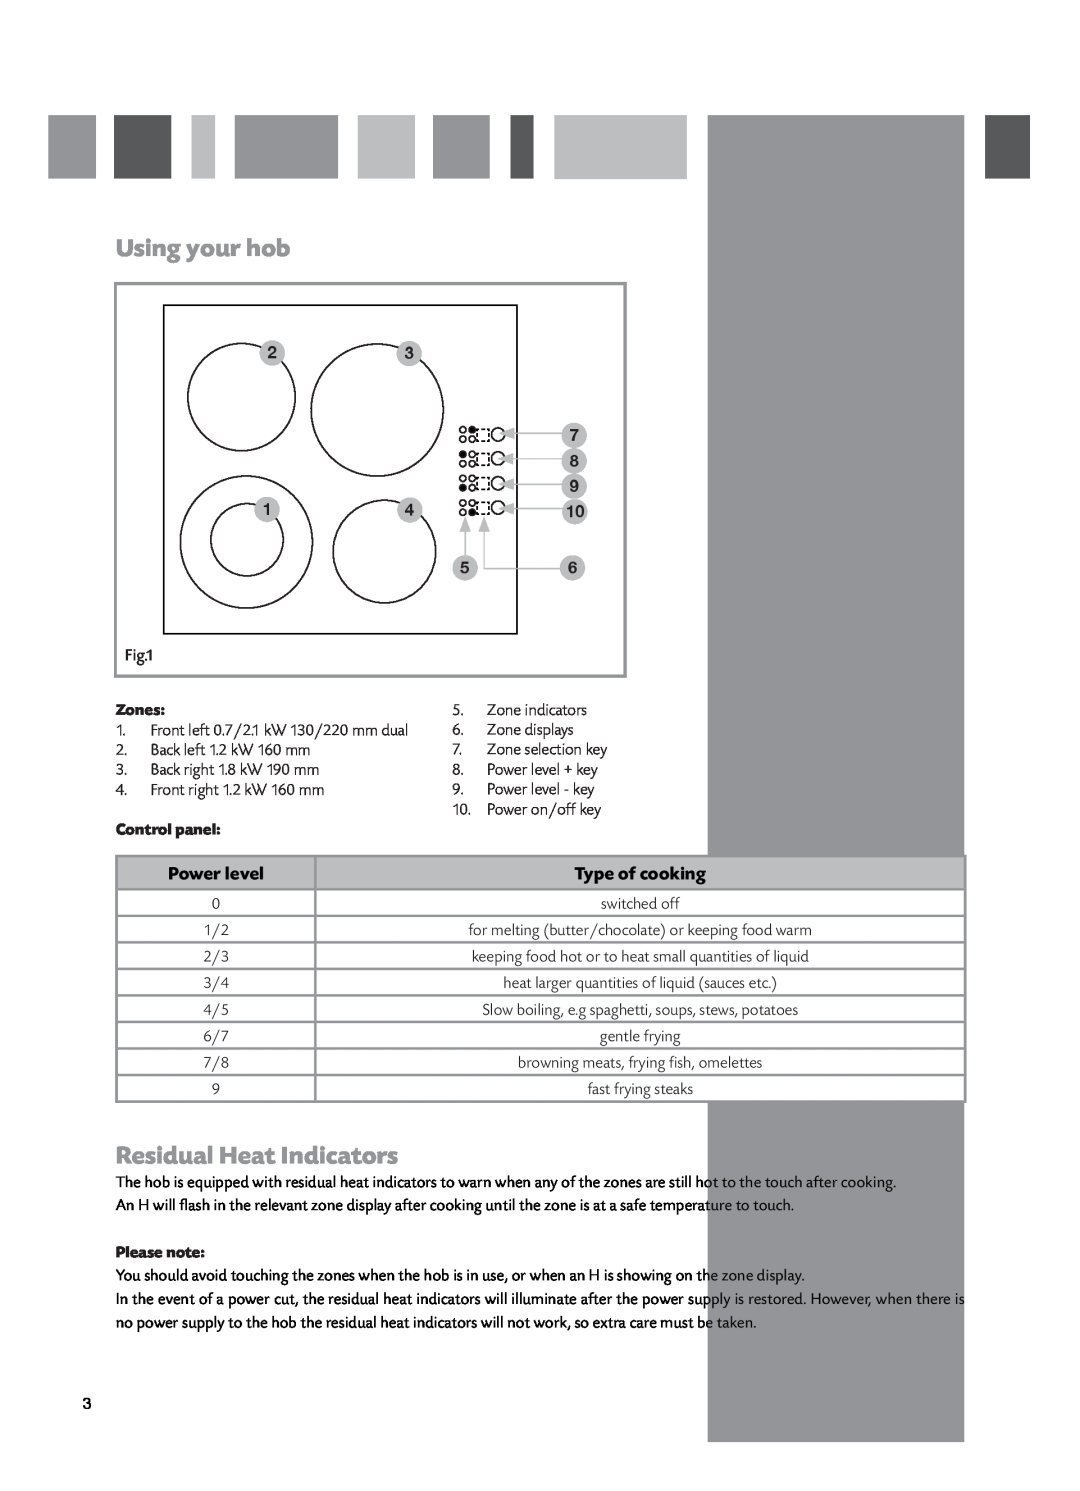 CDA HCC662 manual Using your hob, Residual Heat Indicators, Power level, Type of cooking, Zones, Control panel, Please note 